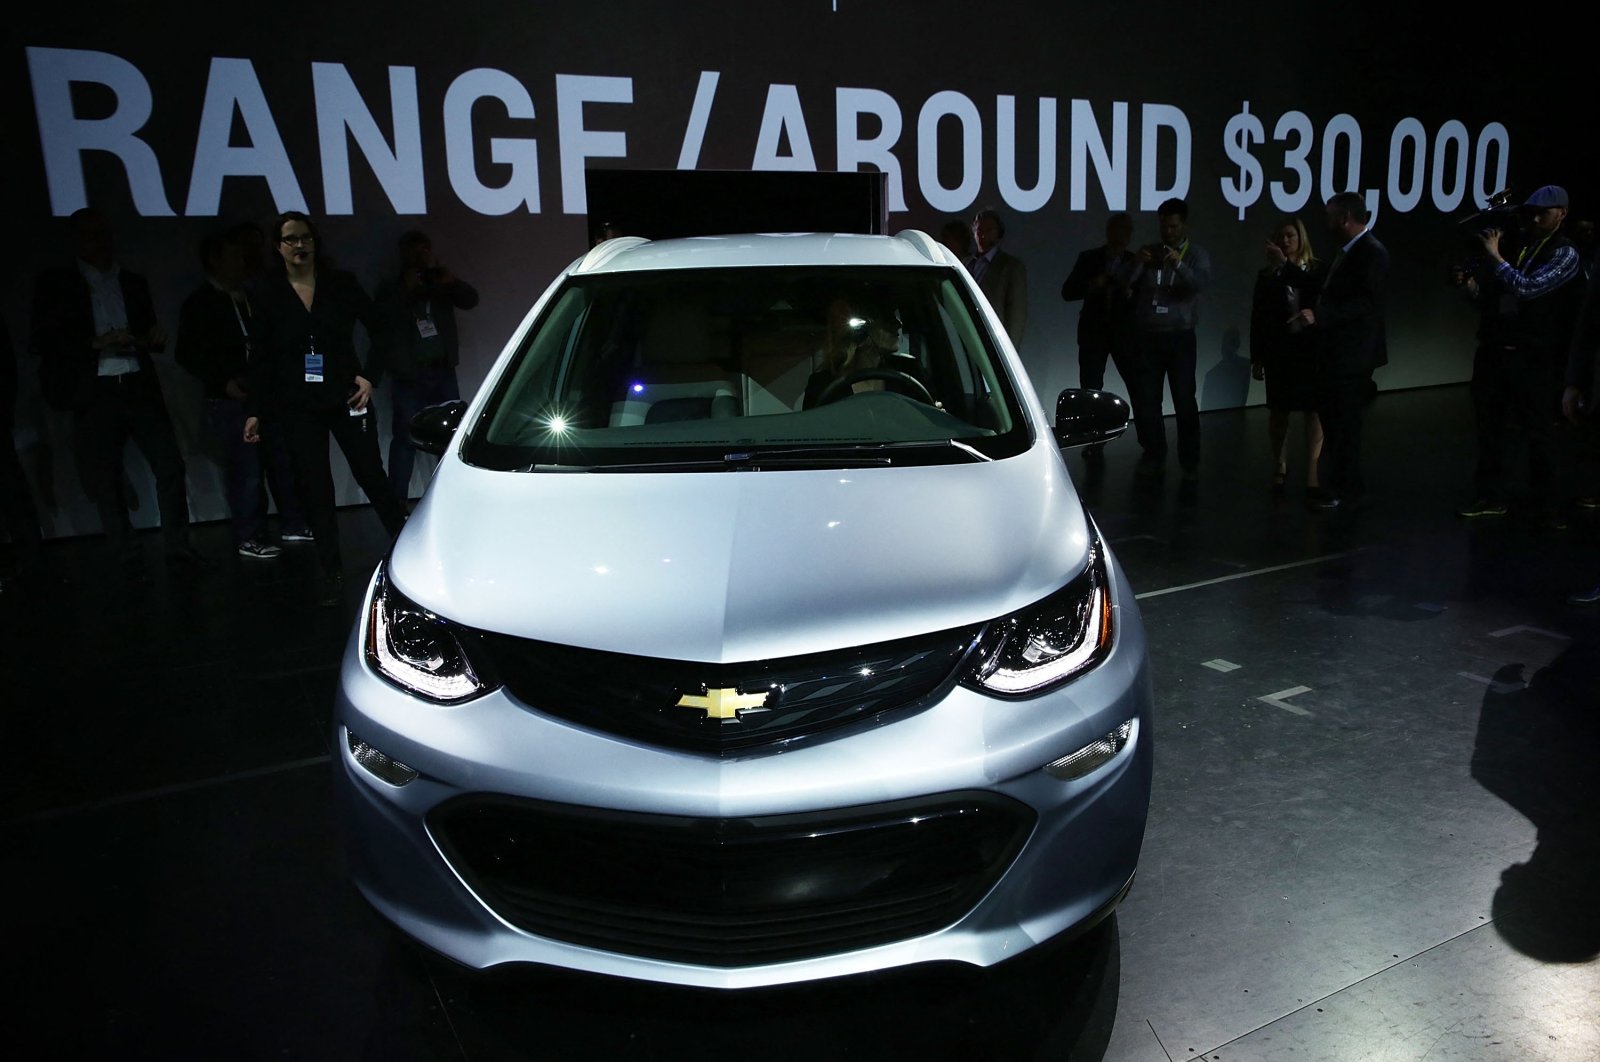 The new Chevy Bolt EV is seen on stage after a keynote address at CES 2016 at the Westgate Las Vegas Resort & Casino in Las Vegas, Nevada, U.S., Jan. 6, 2016. (AFP Photo)